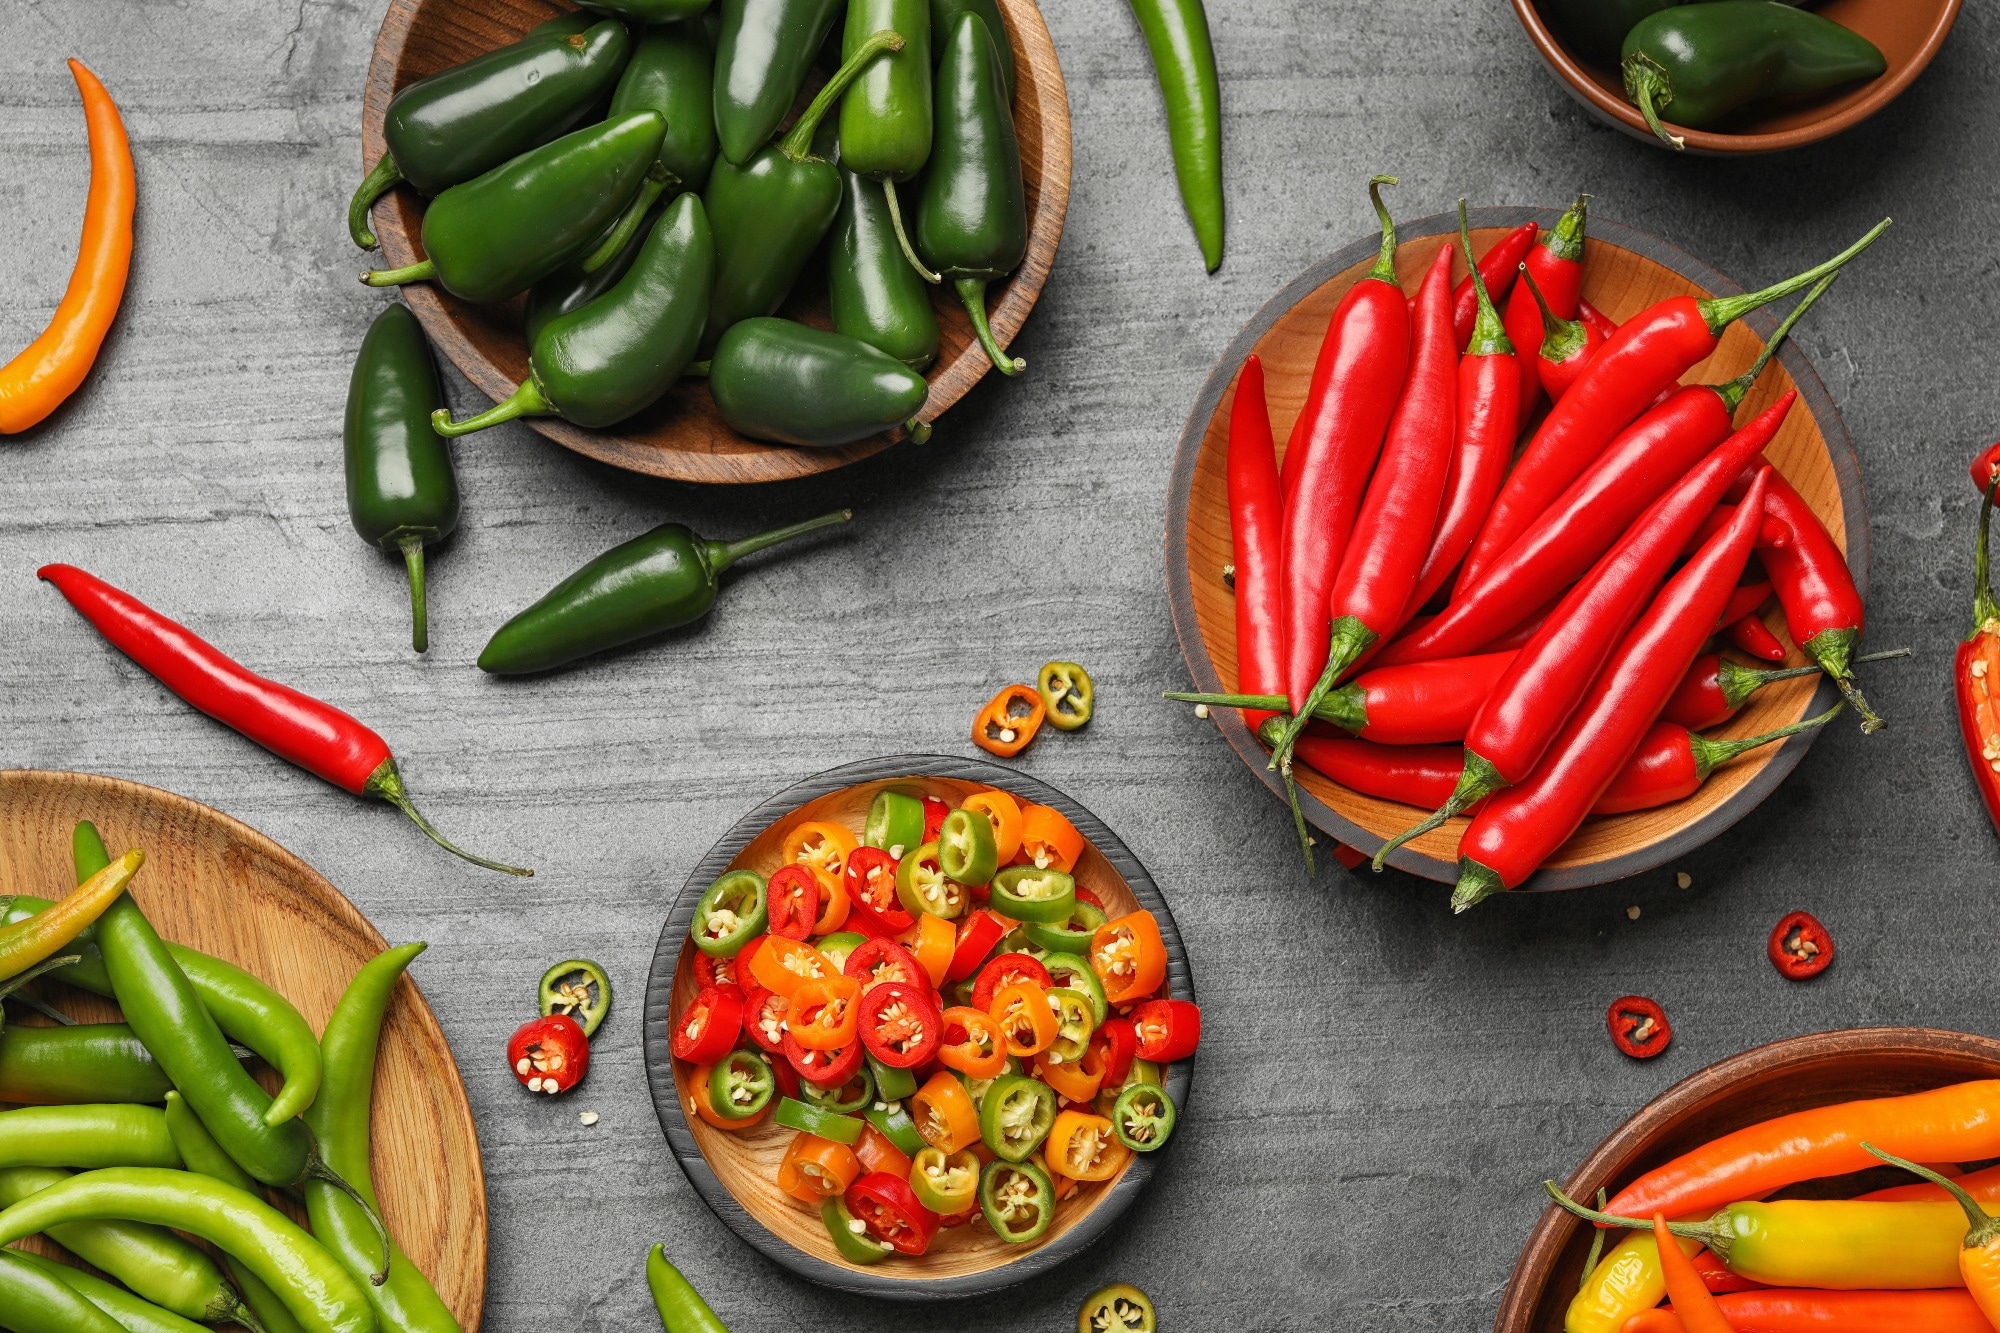 Study: Spicy food intake predicts Alzheimer-related cognitive decline in older adults with low physical activity. Image Credit: New Africa / Shutterstock.com